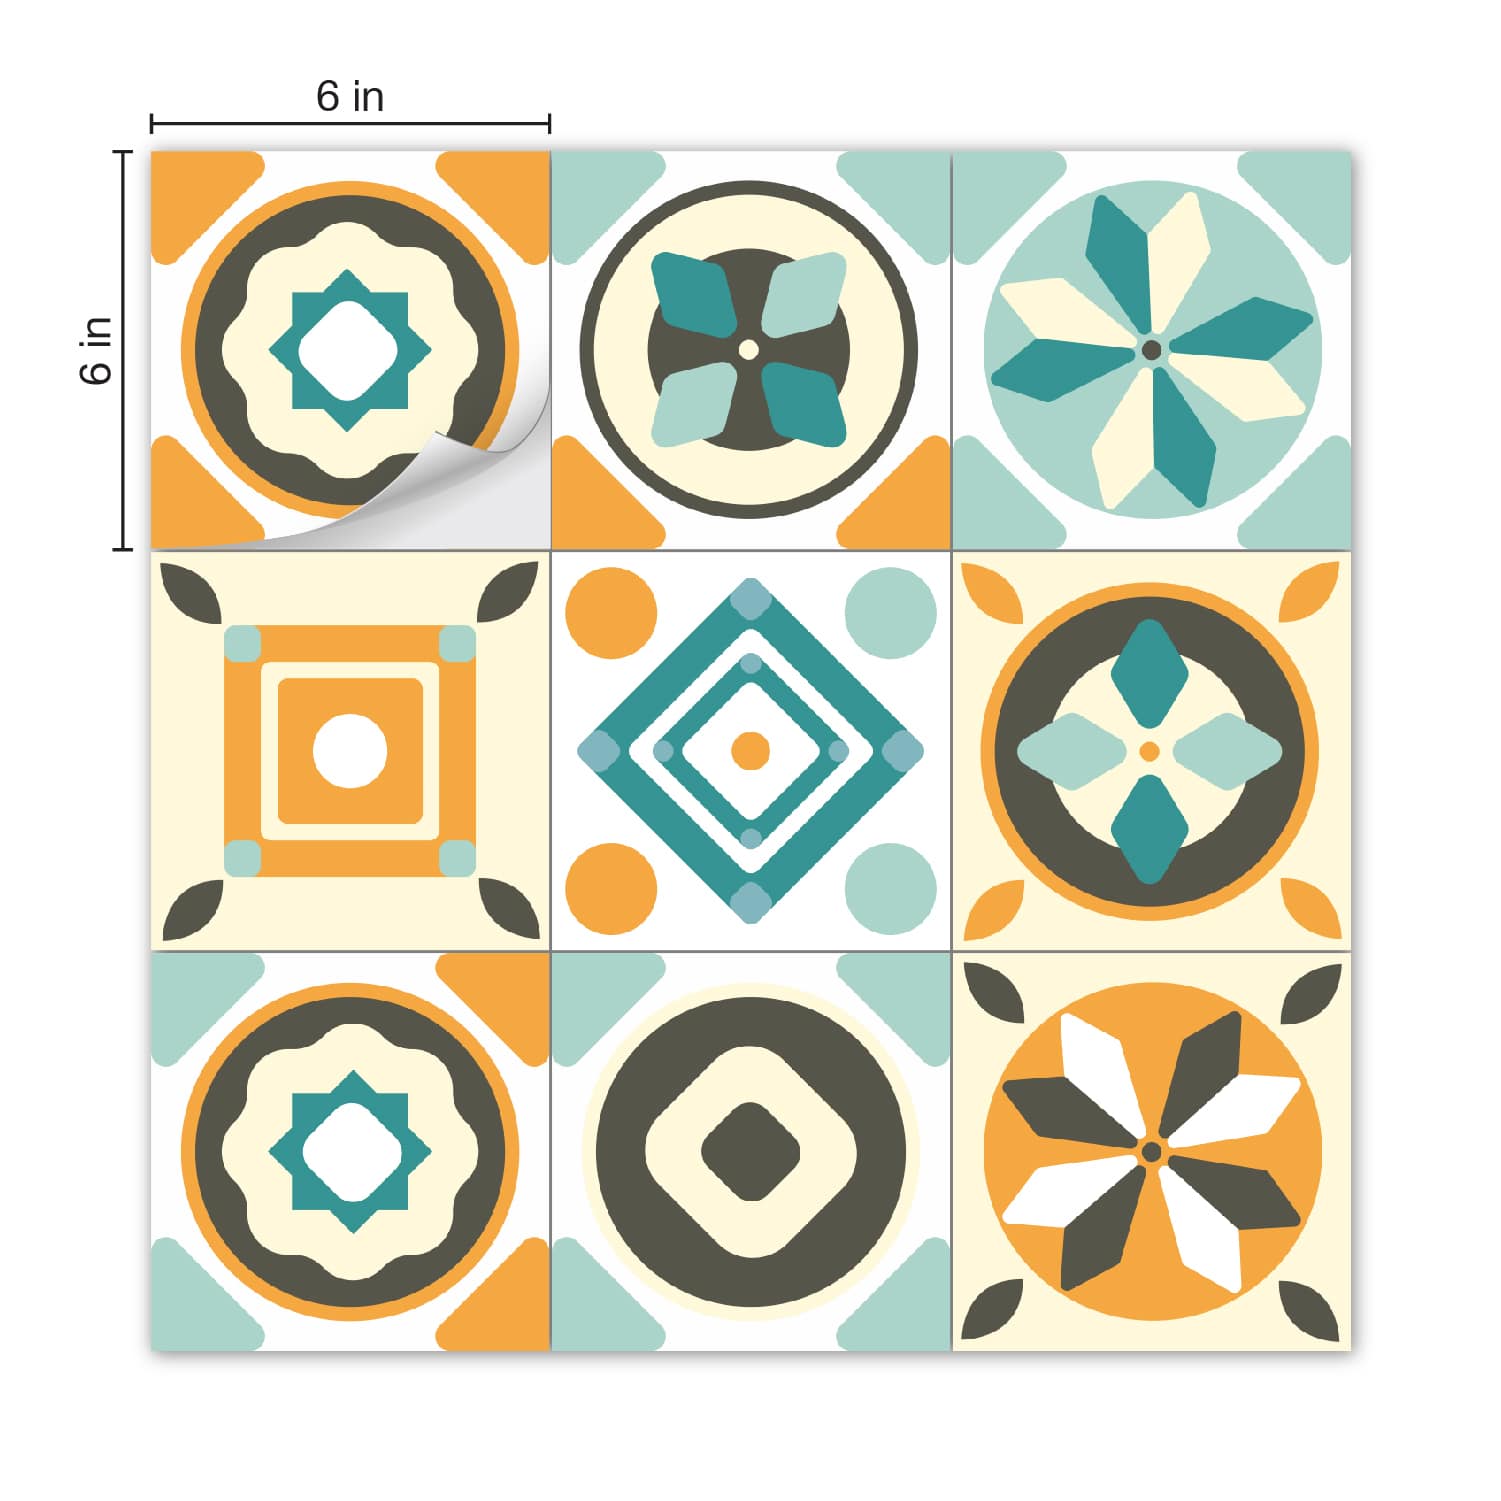 Tile Stickers Mexican Tile Stickers - Mosaicowall Mosaicowall Mexican Tile Stickers